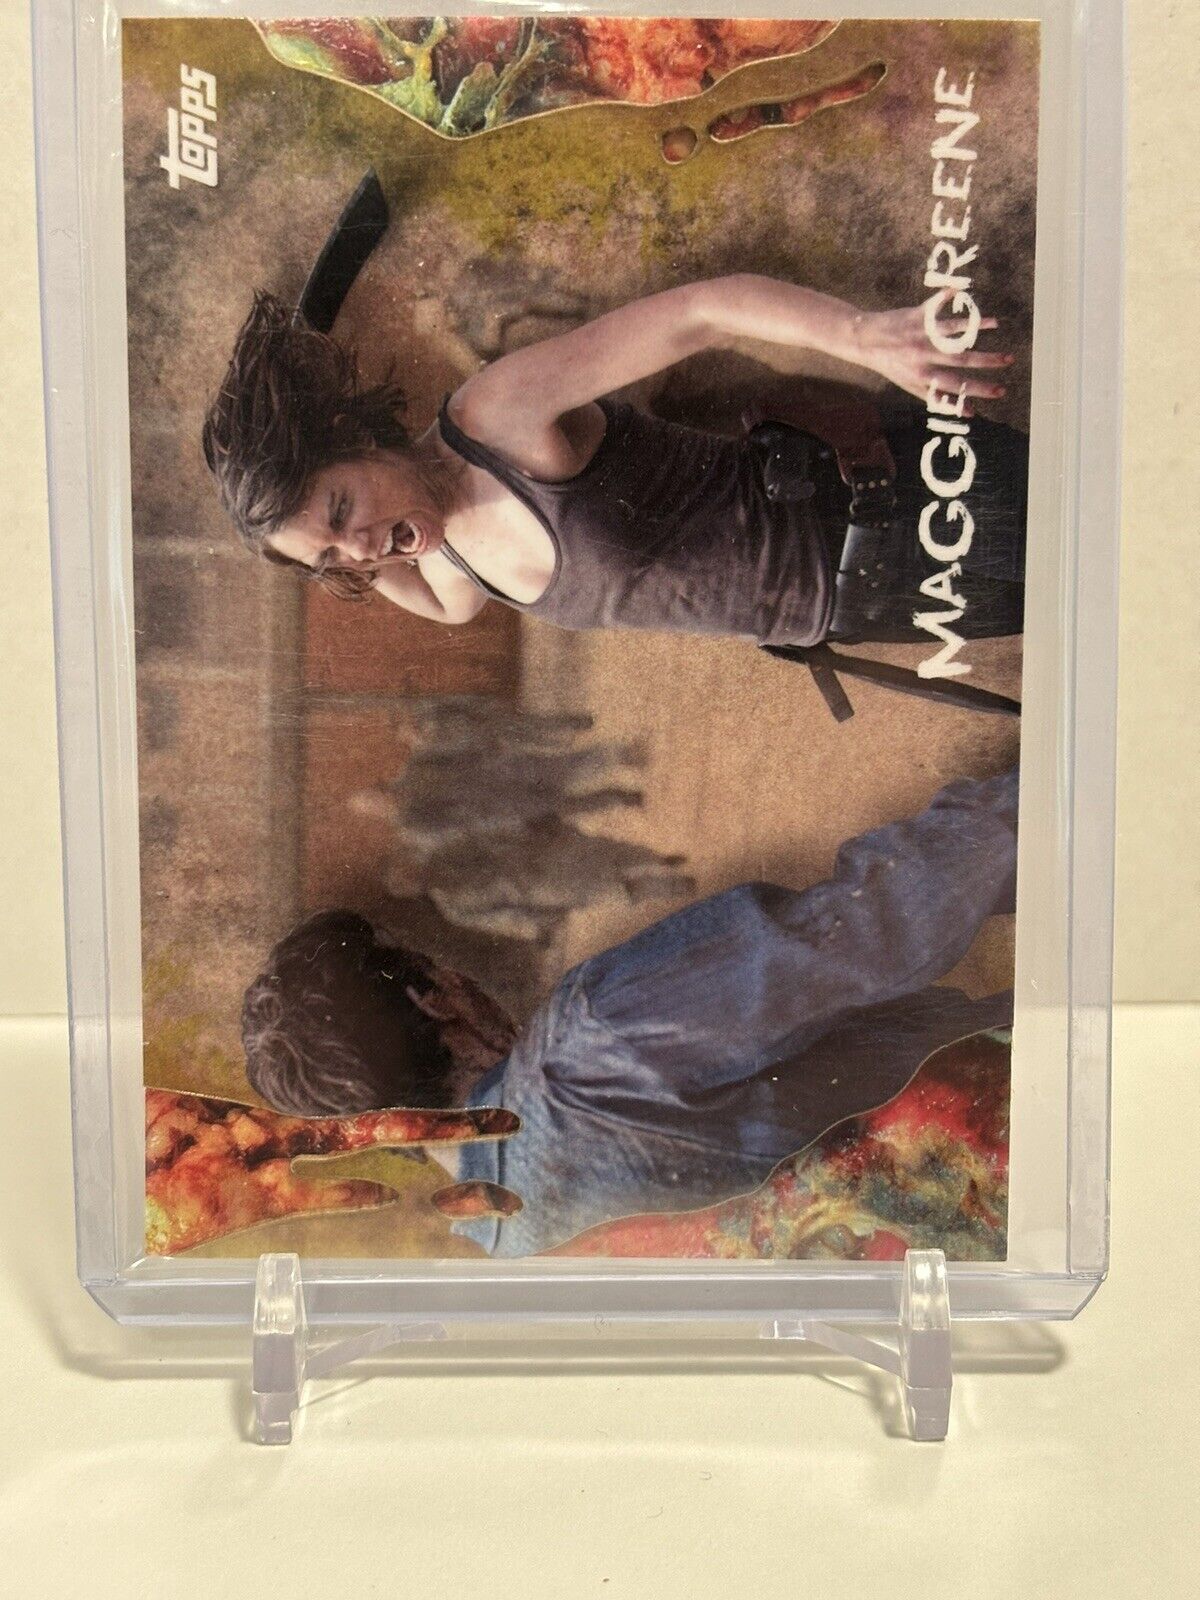 2016 Topps The Walking Dead Survival Box Infected /99 Maggie Greene #8